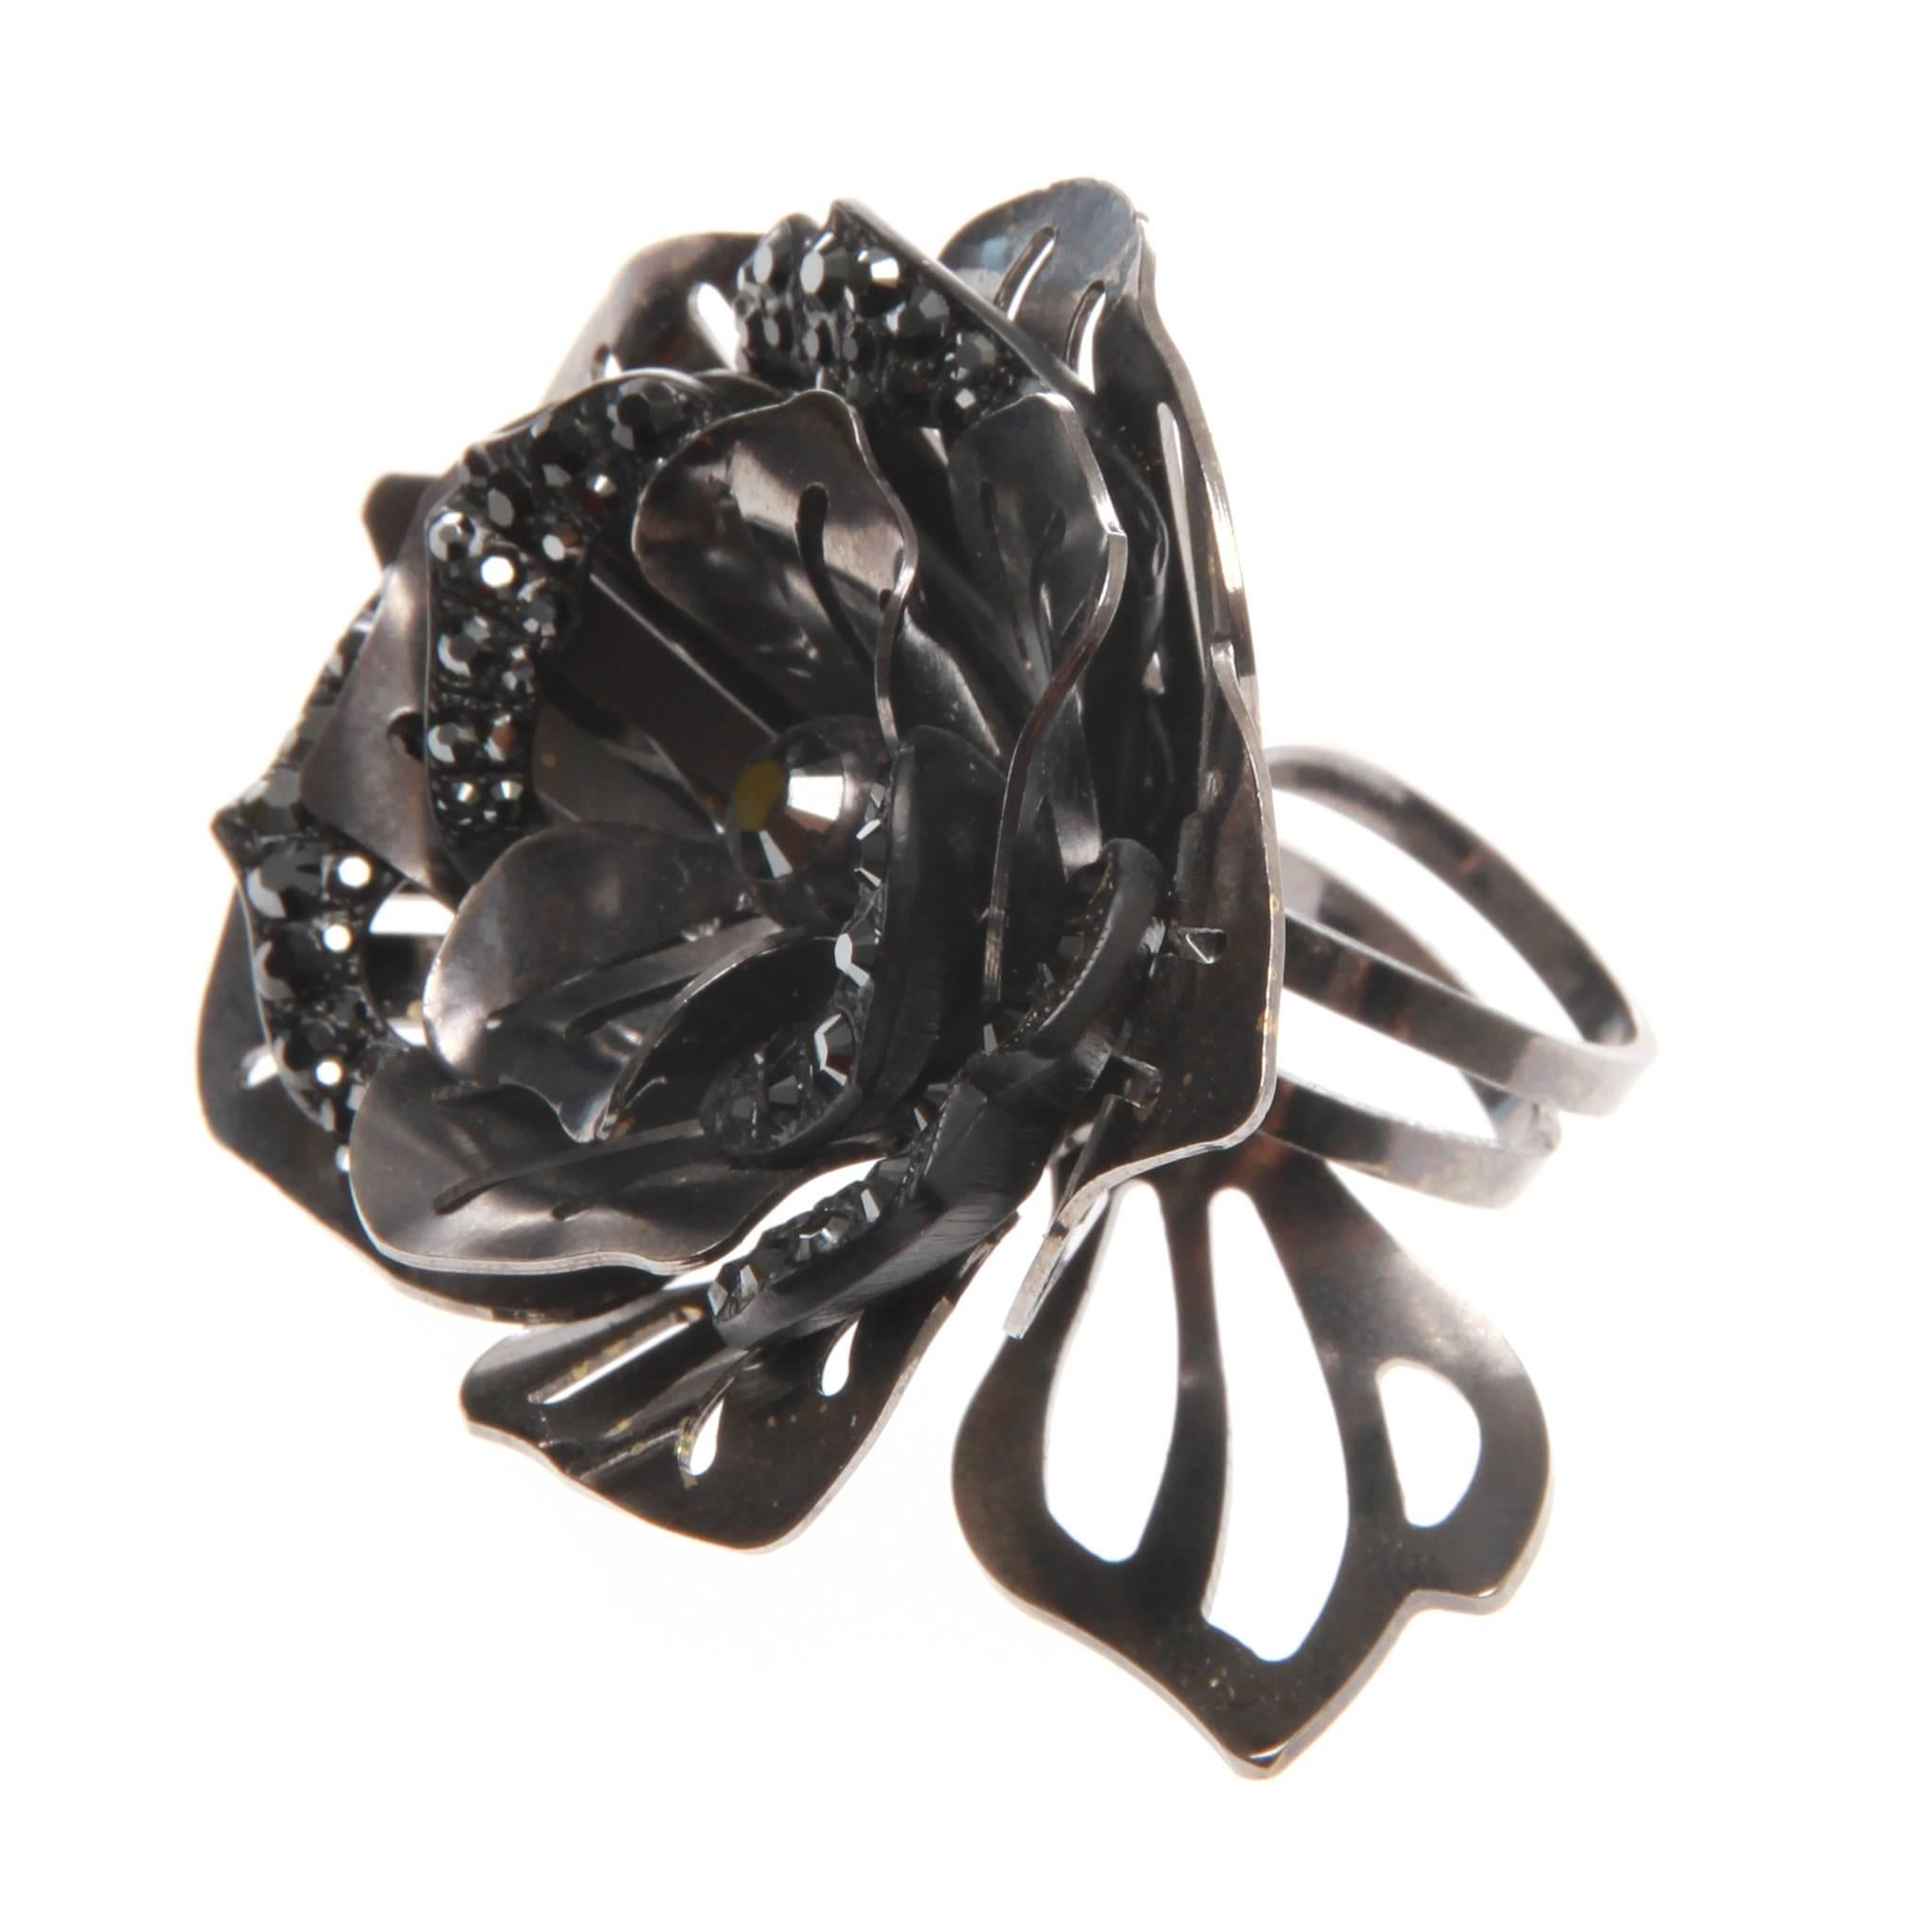 Lanvin crystal embellished flower ring of intricate gun metal work.A beautiful statement piece that is feminine and classic as well as modern. Stamped Lanvin/Paris/Made in France.  

Size 
US 6.5/UK M

Comes with authentic box.